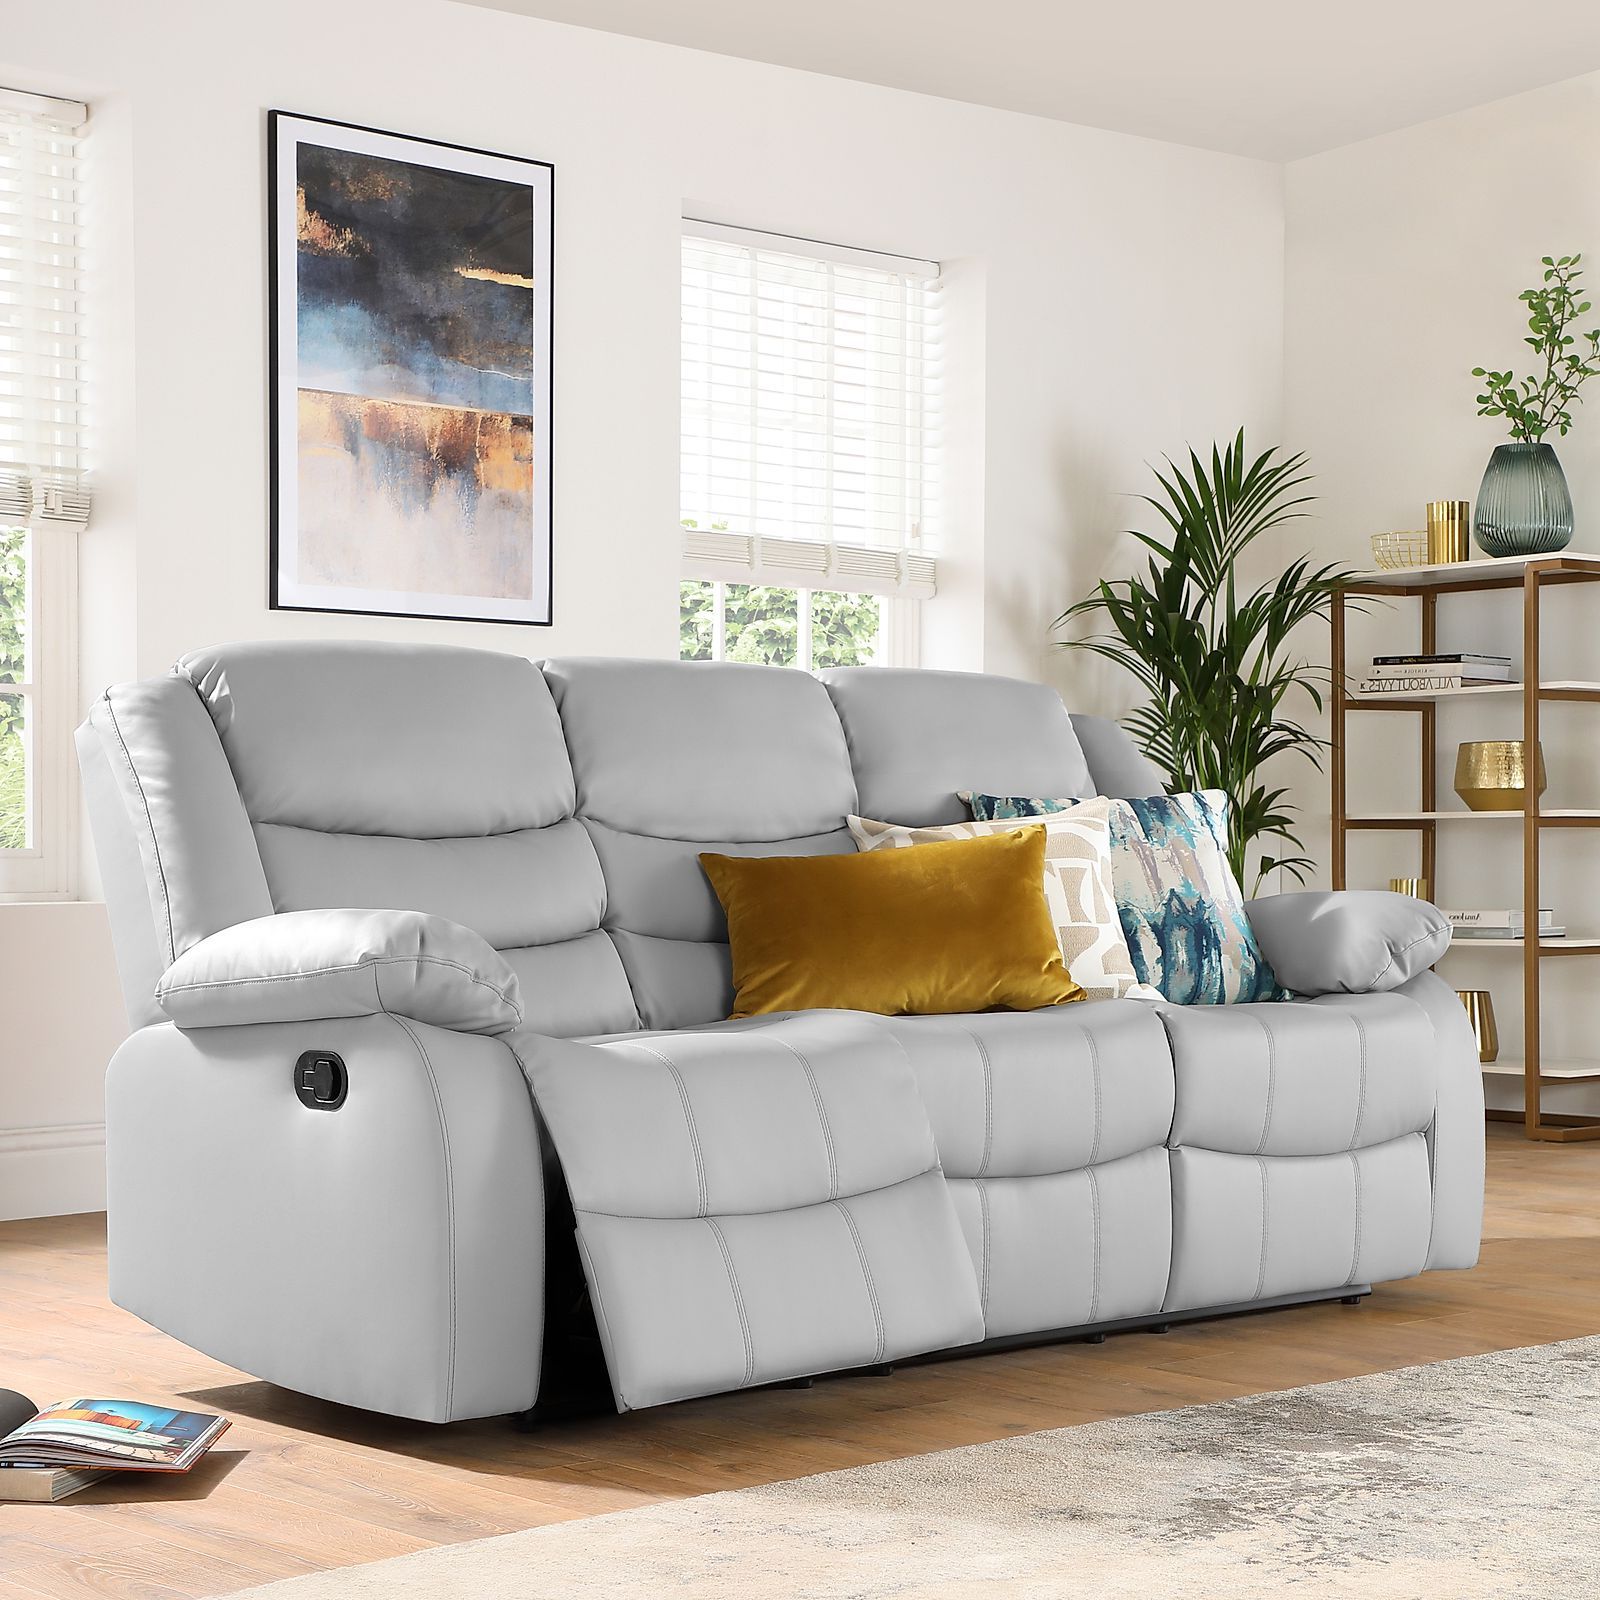 Furniture Choice Regarding Most Current Sofas In Light Gray (View 12 of 15)